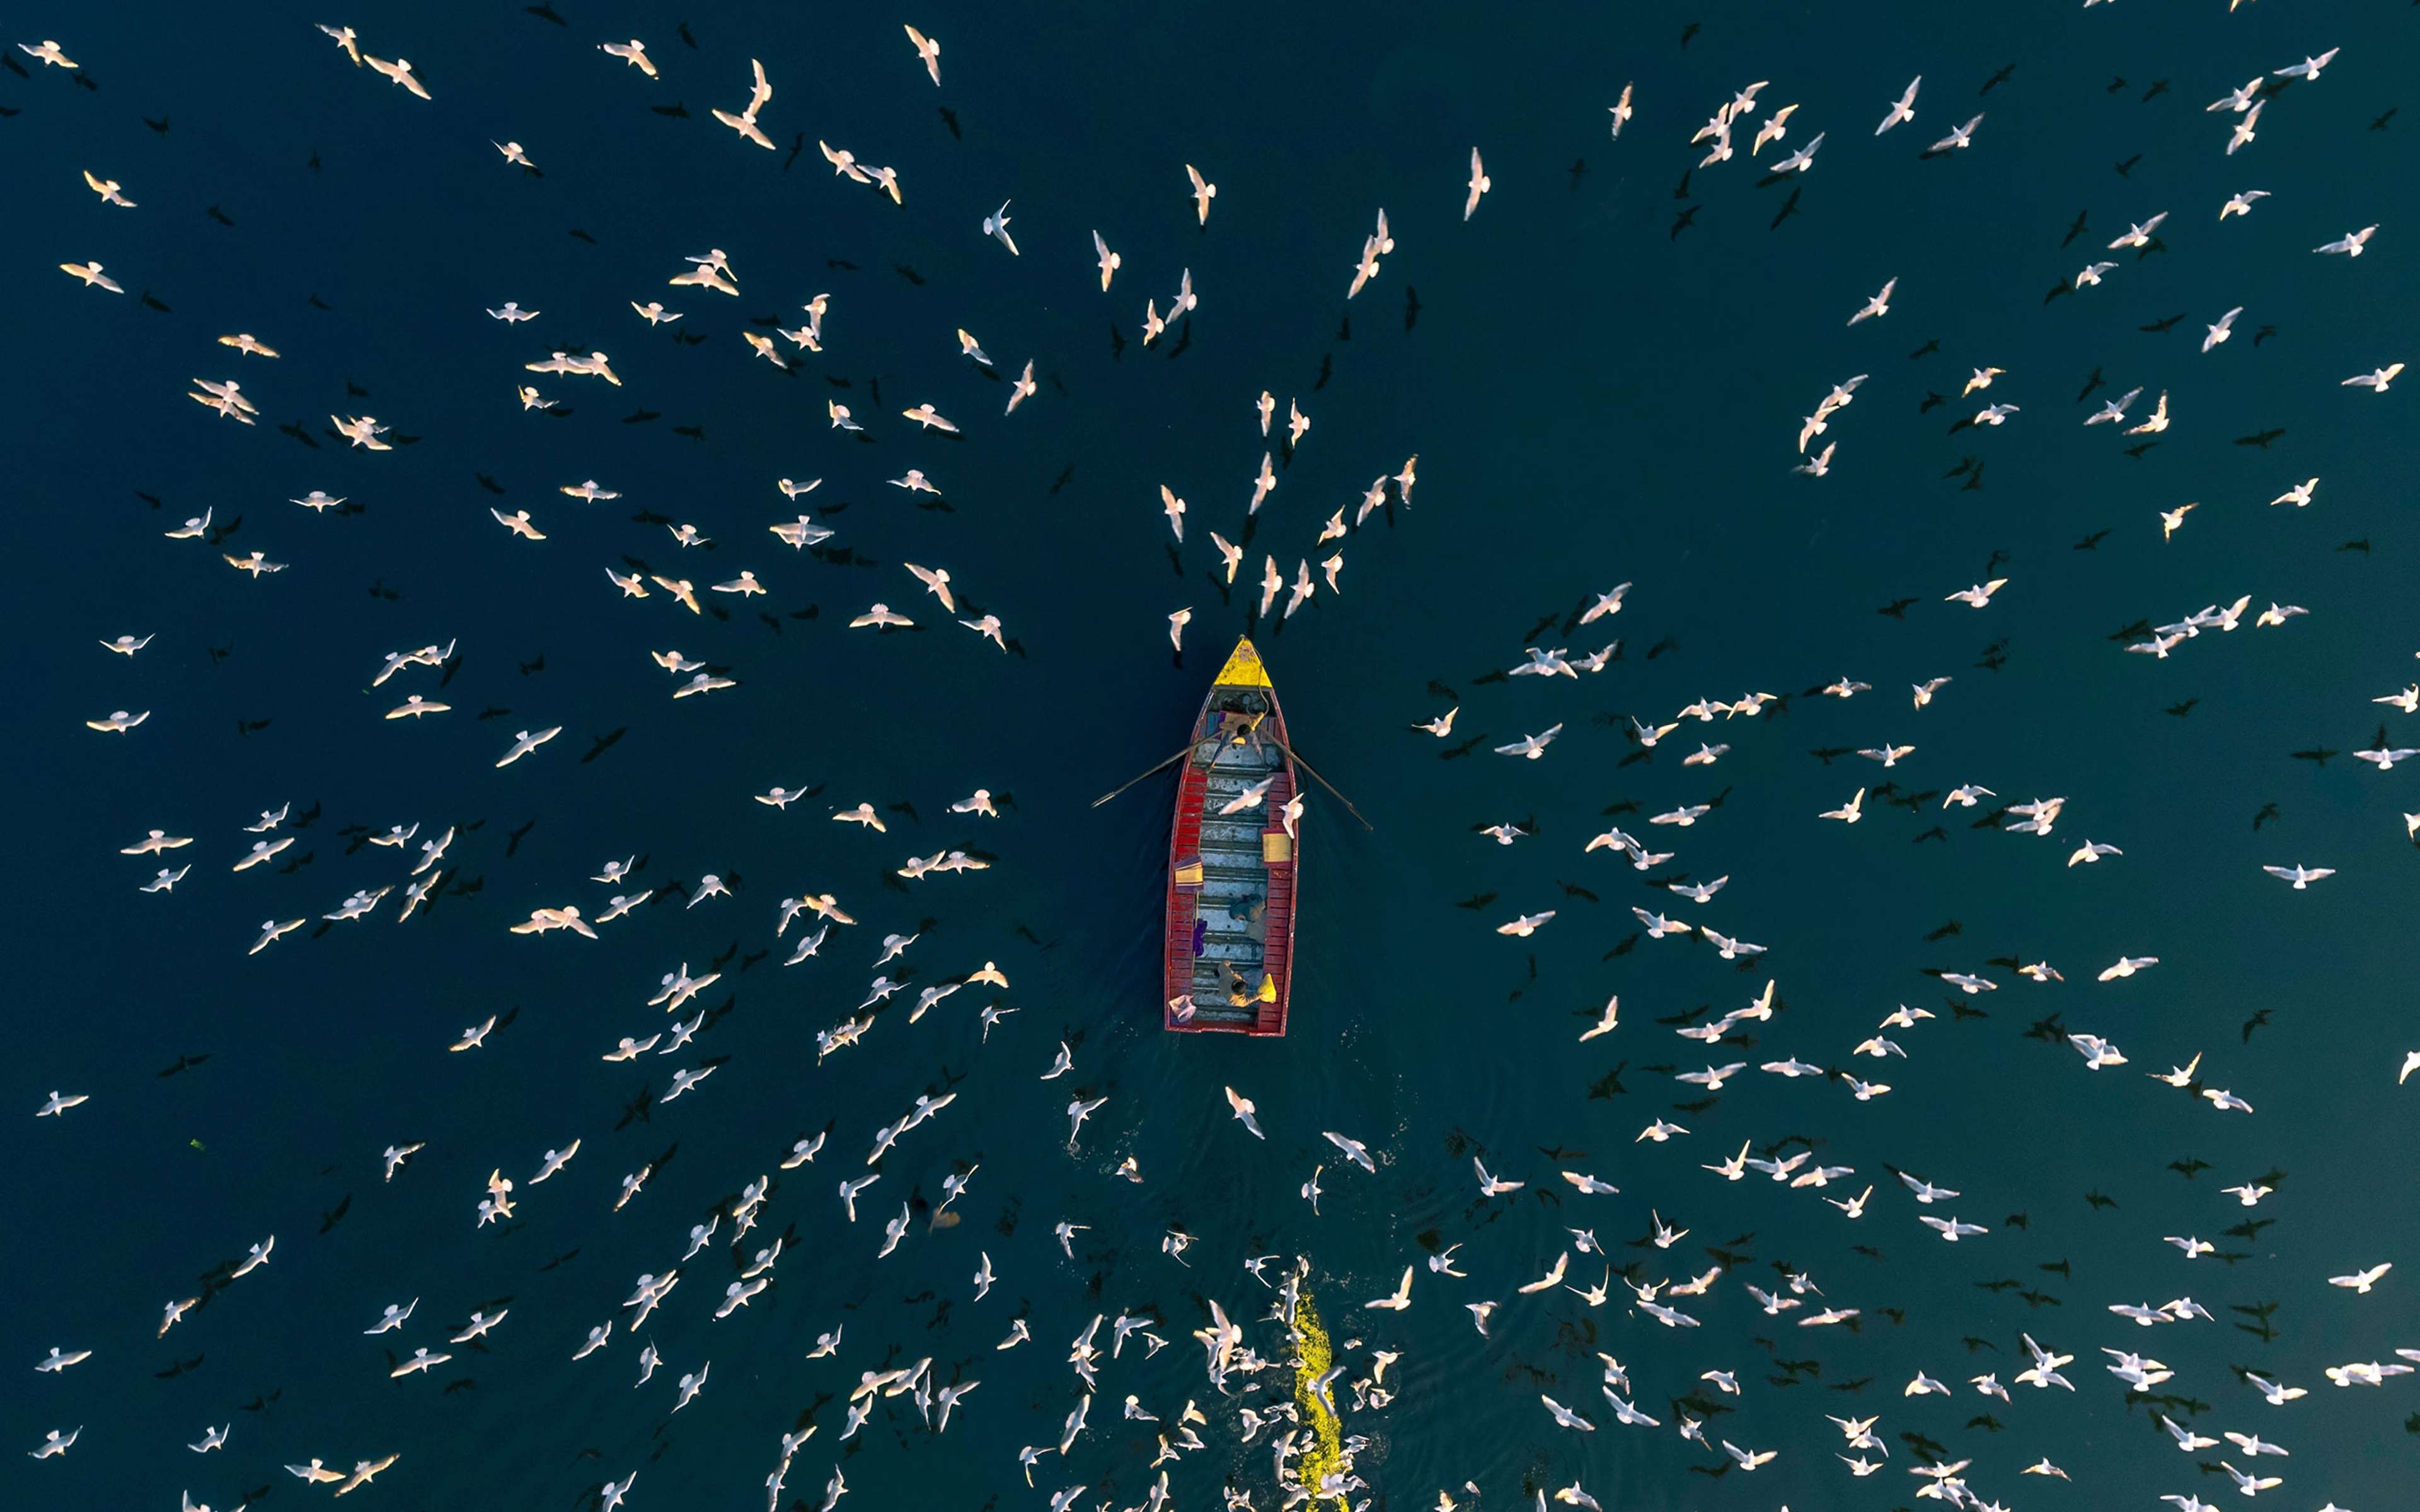 Aerial view of a boat sailing along the Yamuna river at sunset surrounded by seagulls along the coast in New Delhi, India.